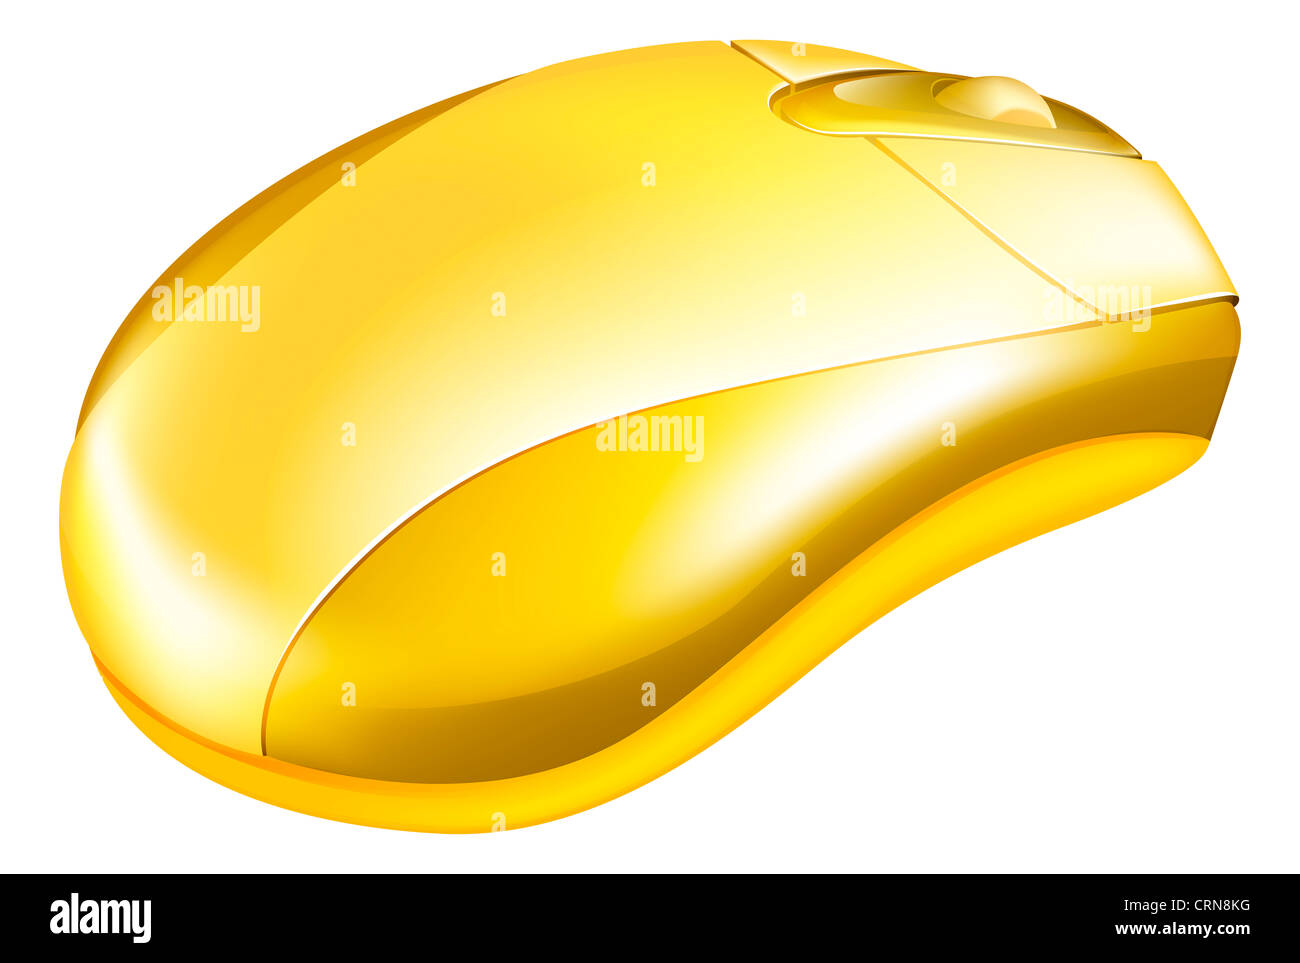 Illustration of a metallic gold computer mouse with wheel Stock Photo